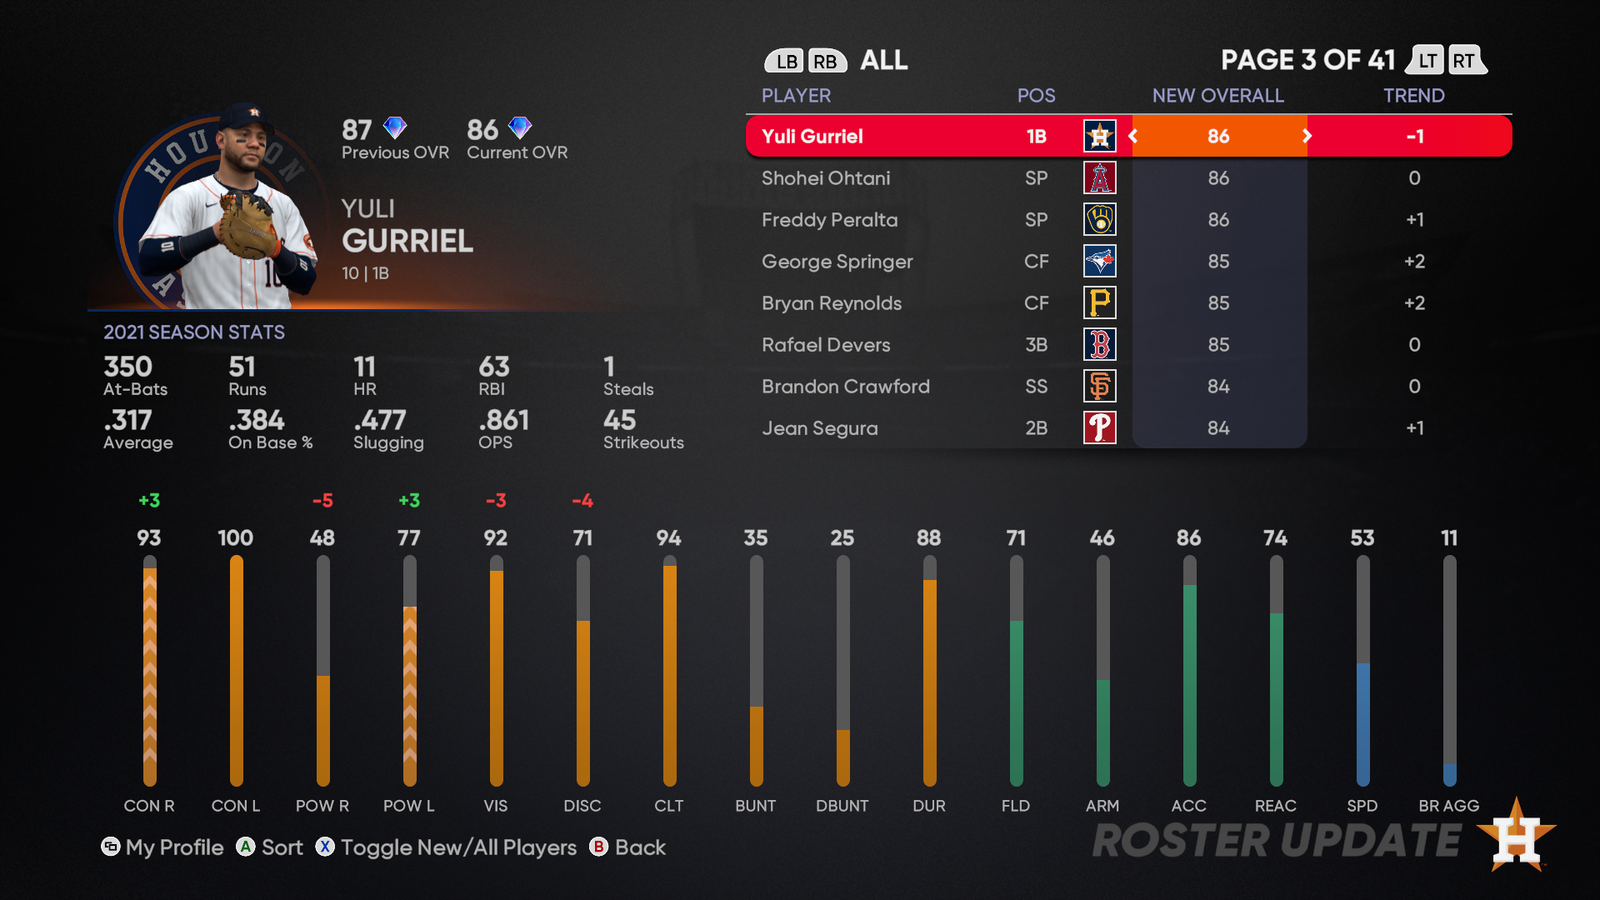 MLB The Show 21 August 13 Roster Update